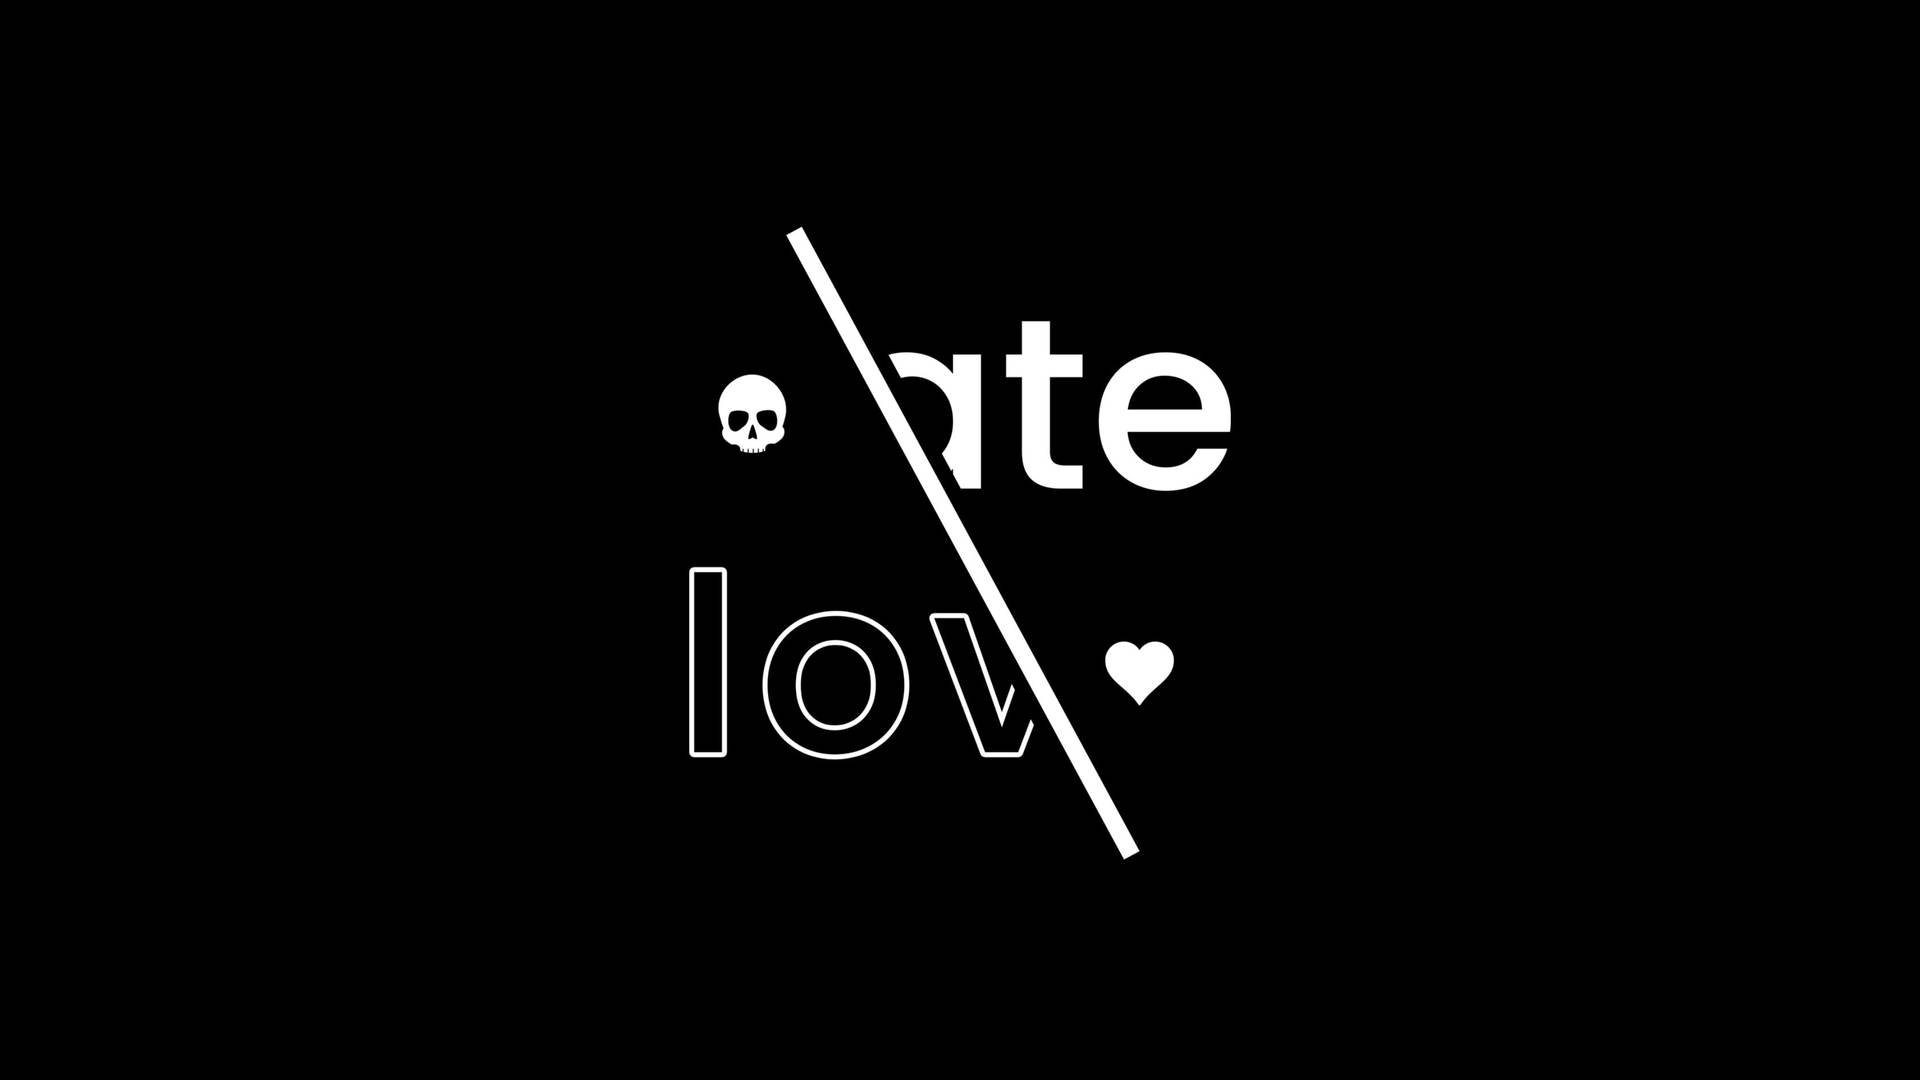 Download Hate Love Black And White Wallpaper 